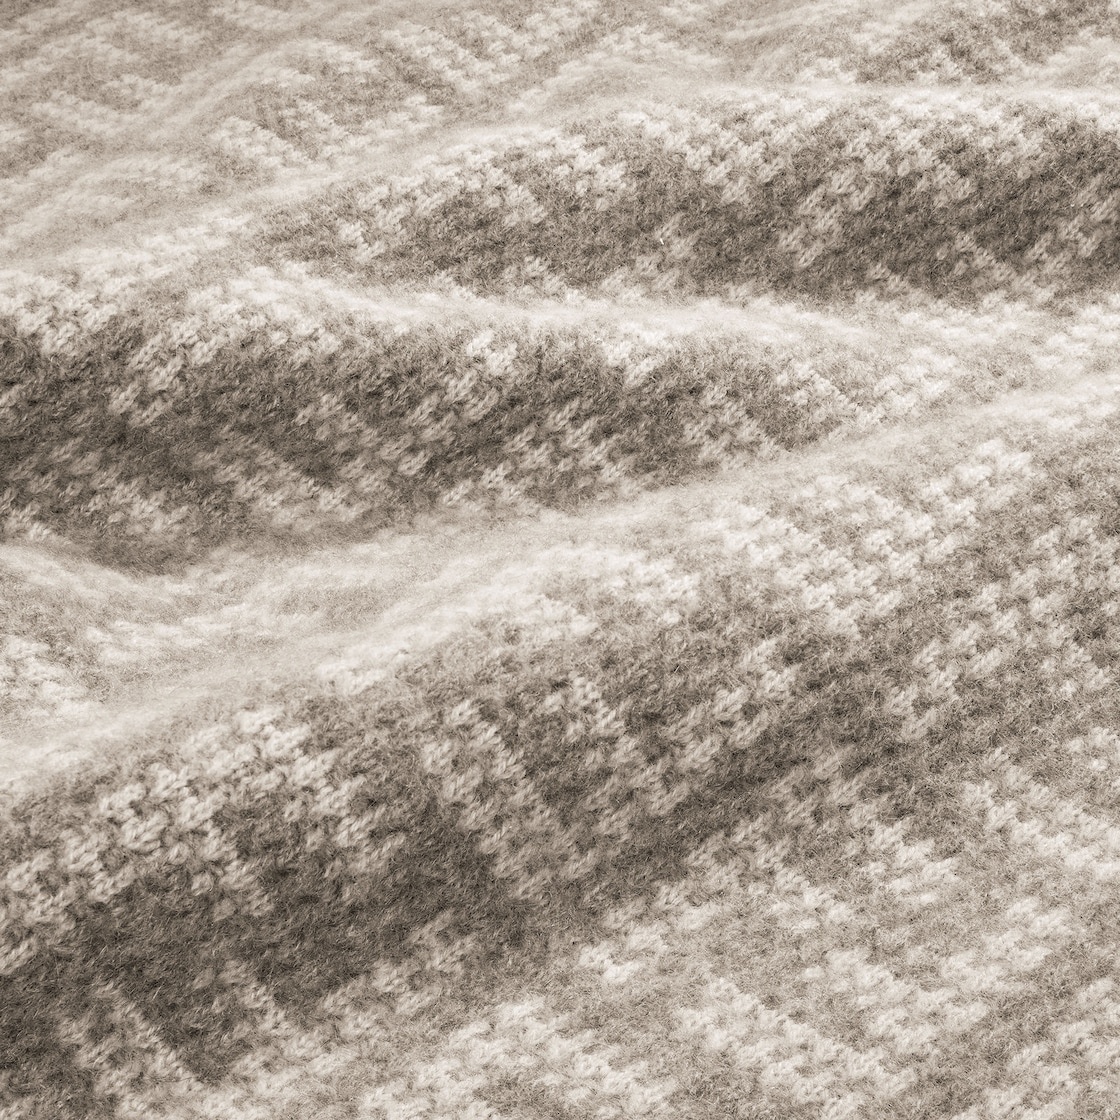 Two-tone soft cashmere blanket with FF motif in natural dove gray and white tones. Designed by Karl  - 3